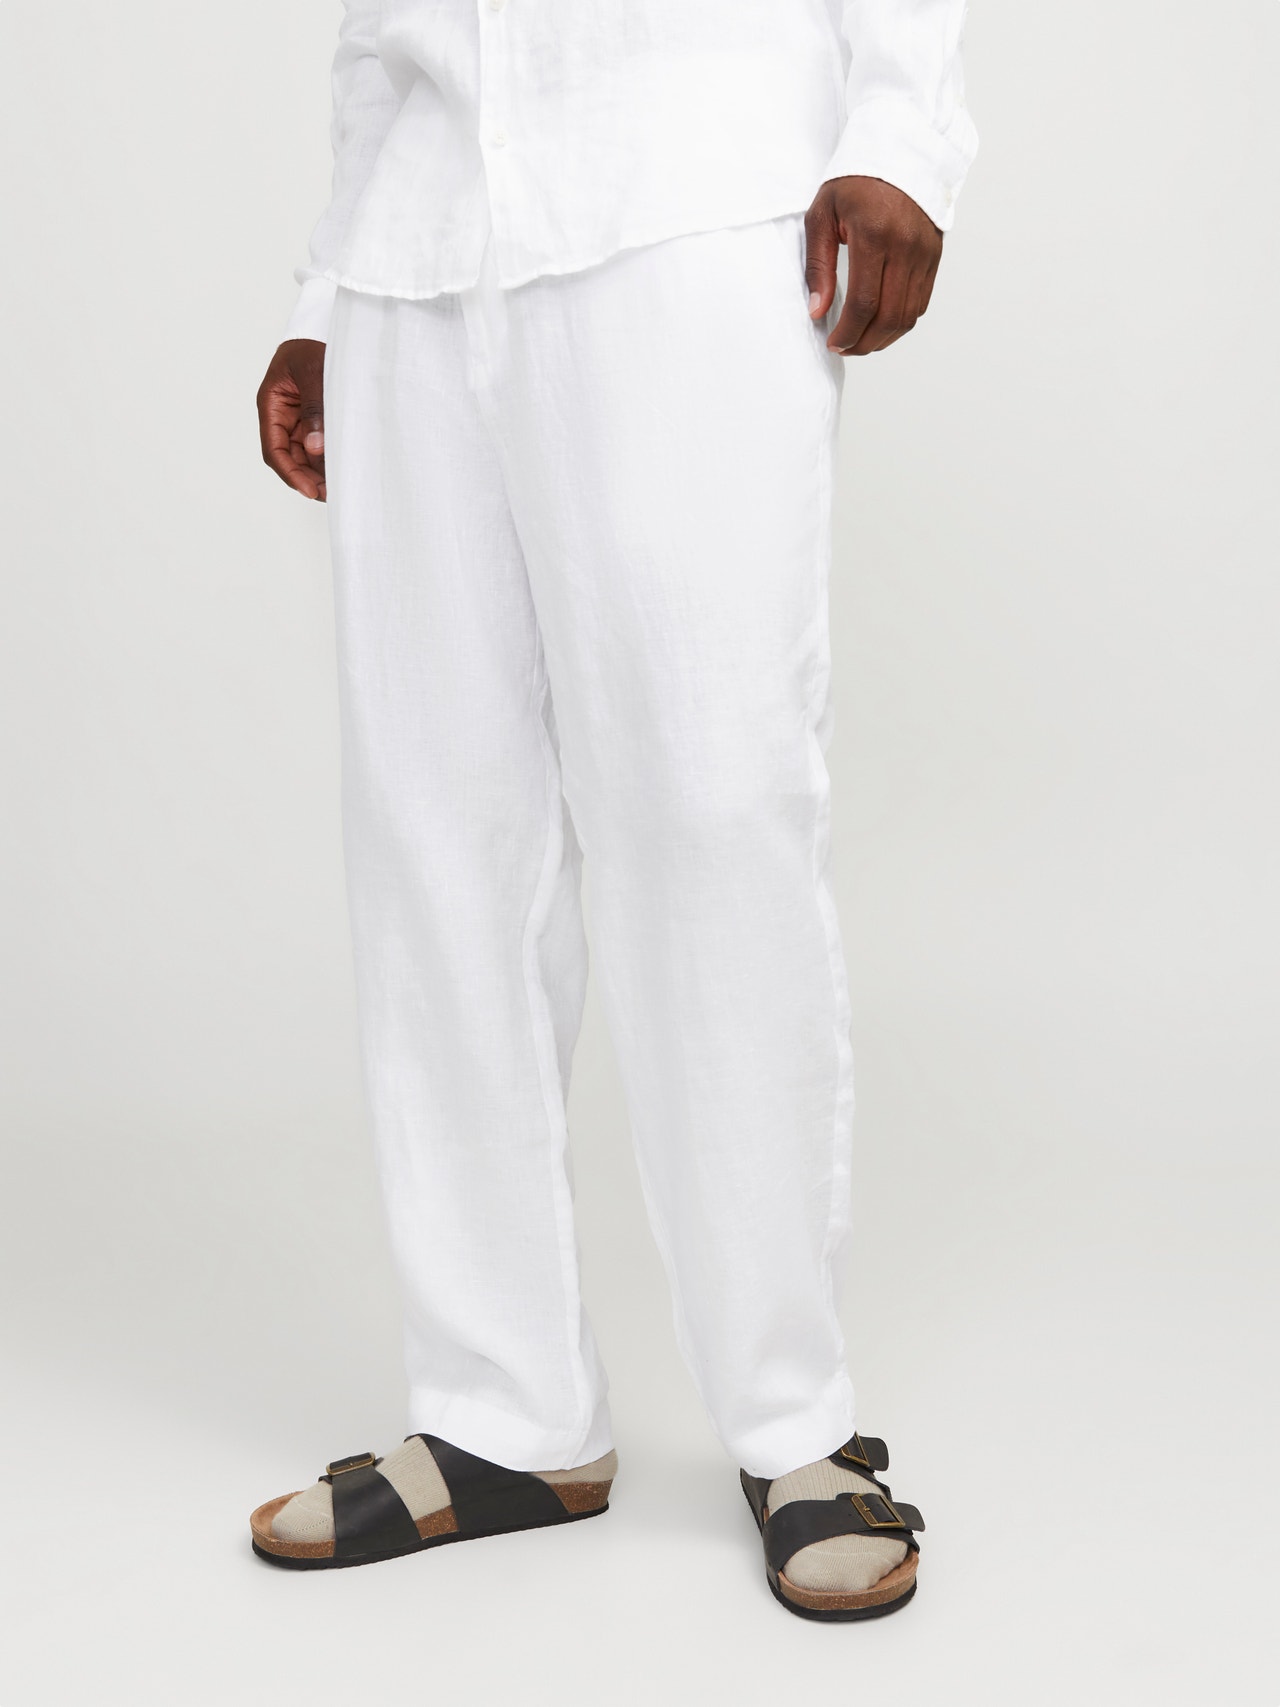 Jack & Jones Loose Fit Chino trousers -Bright White - 12253120